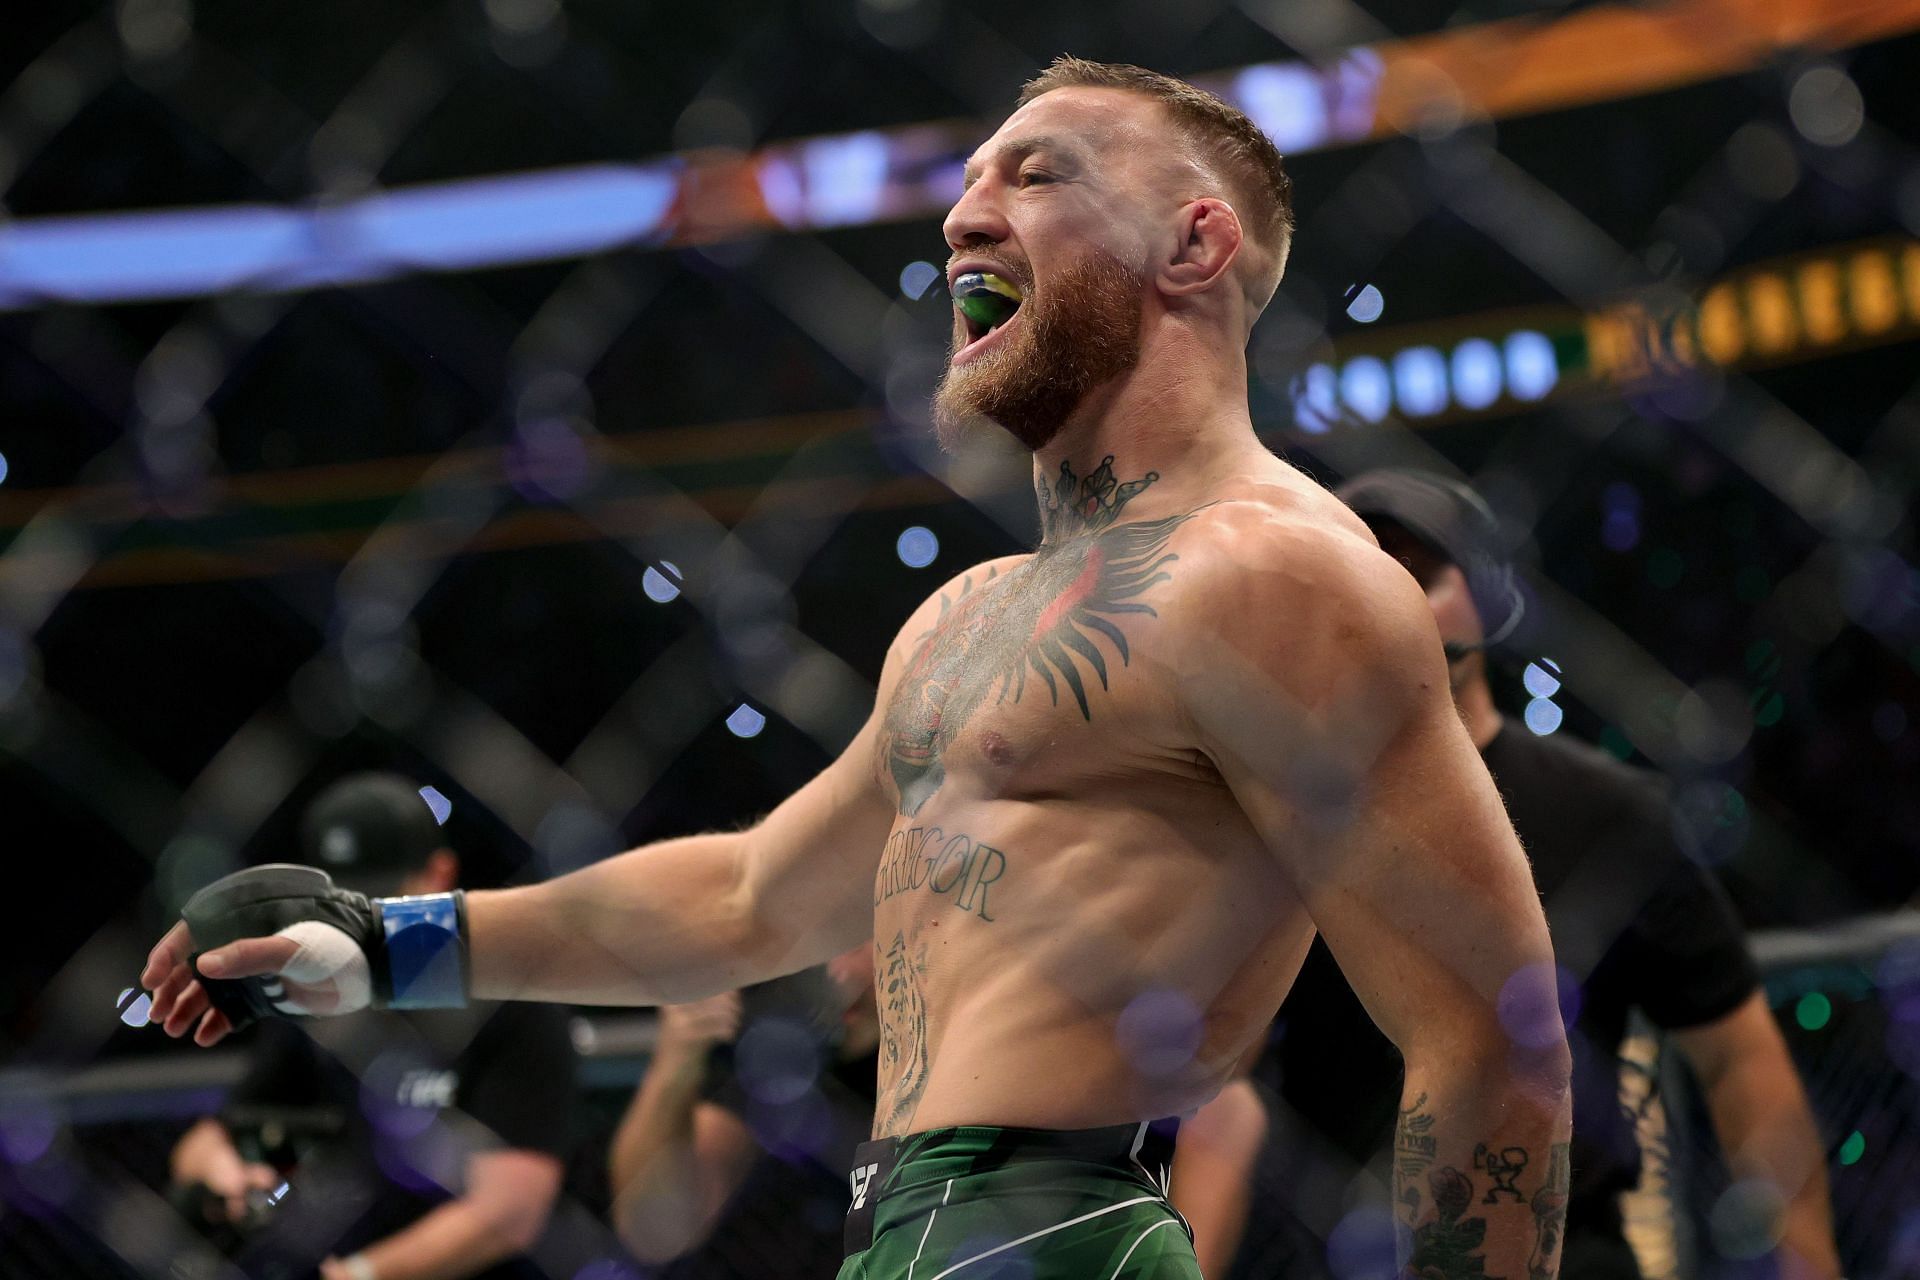 Conor McGregor holds a record of 22-6